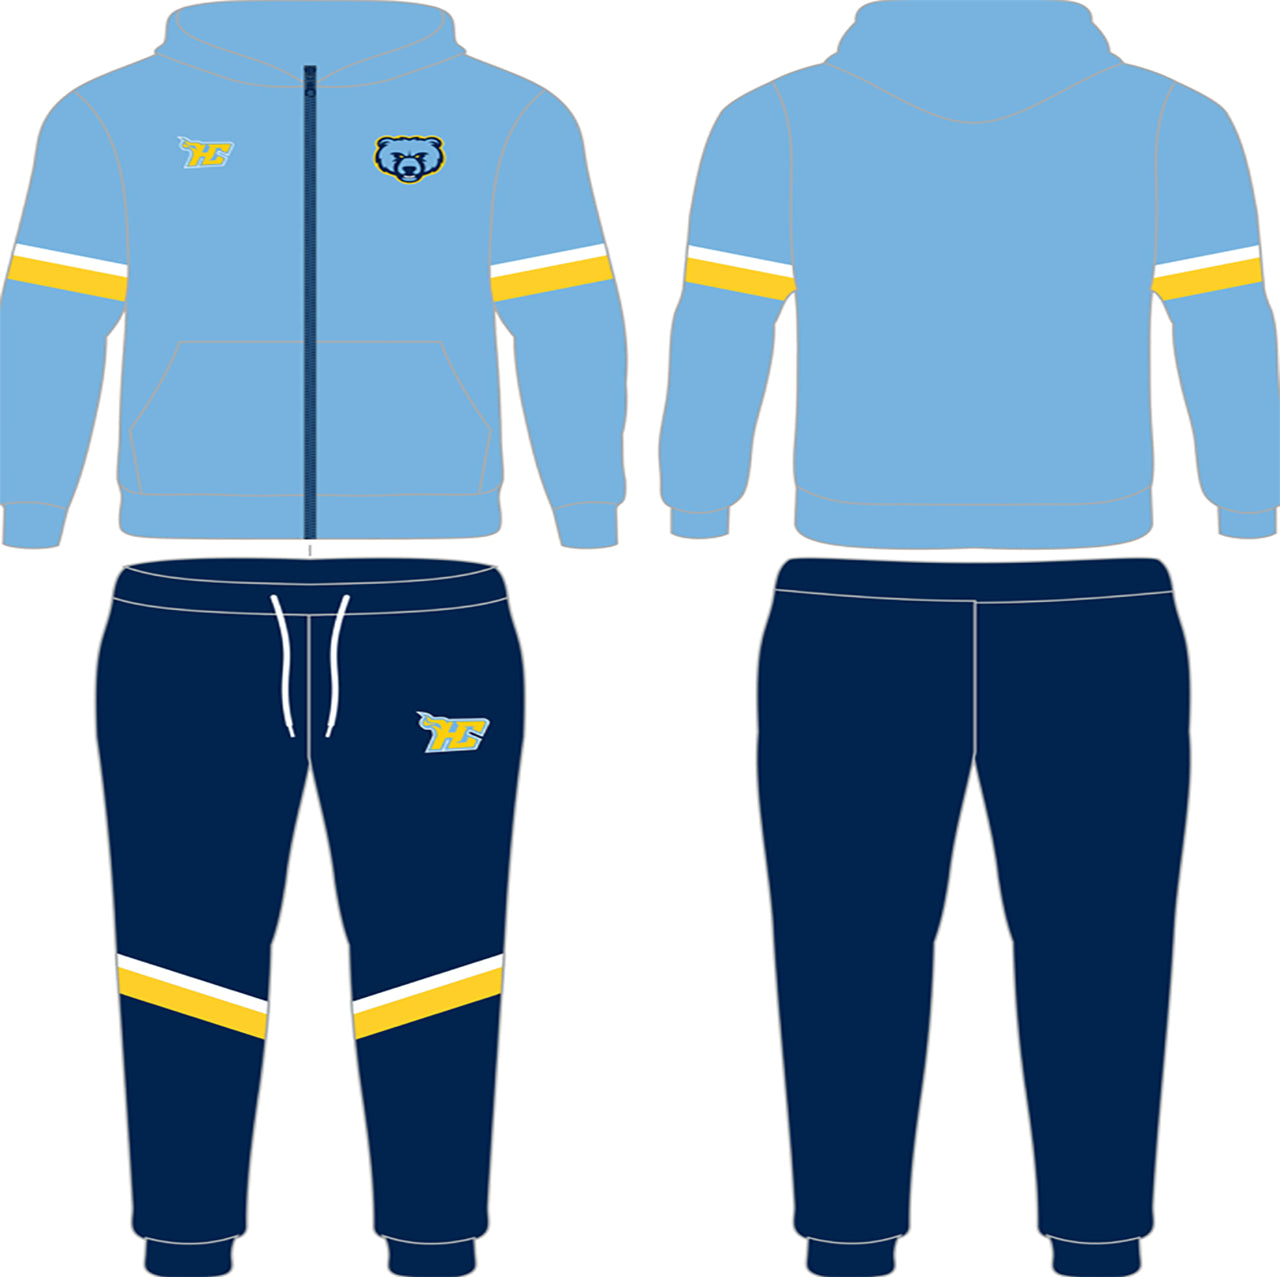 South Florence Tracksuits (Inspired)-DaPrintFactory